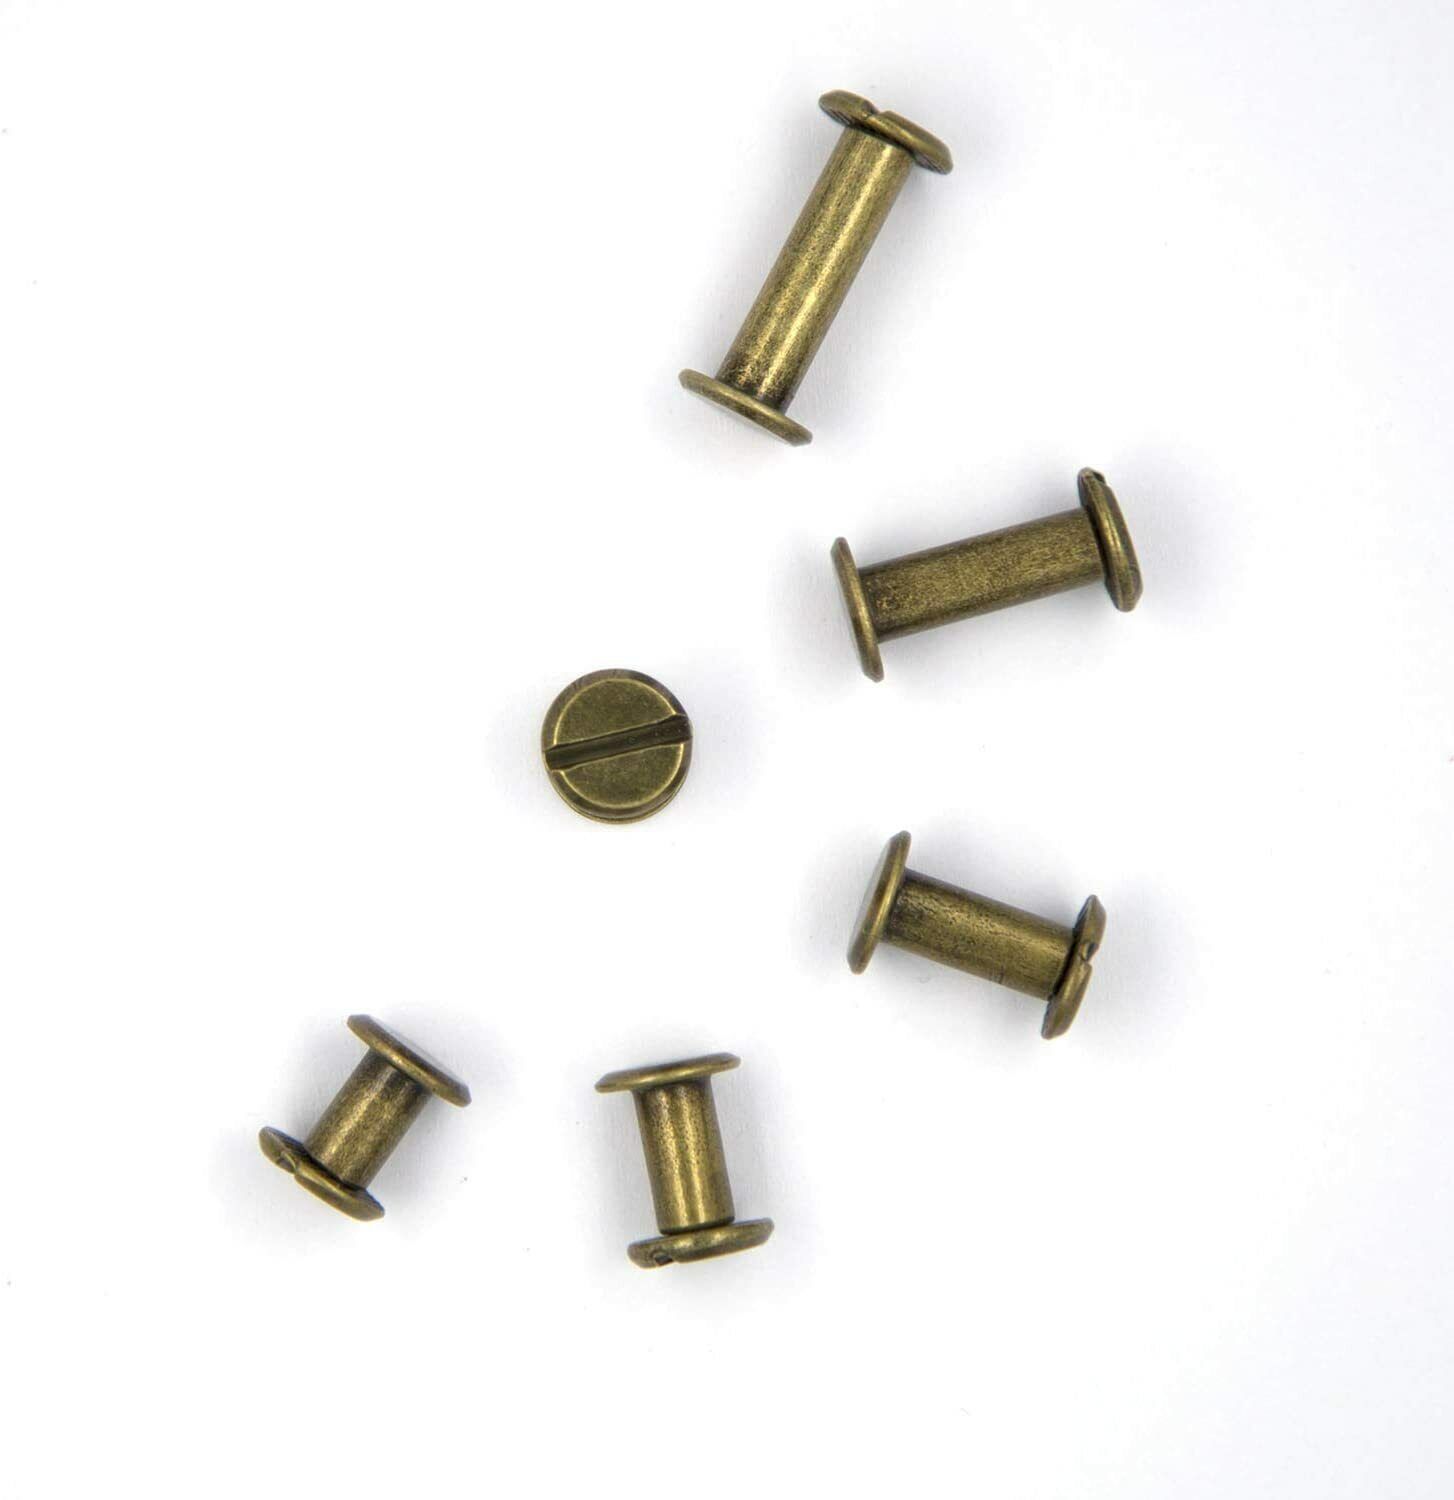 2 Set bronze Chicago Screws For DIY Kydex And Leather Gun Holsters / Clips